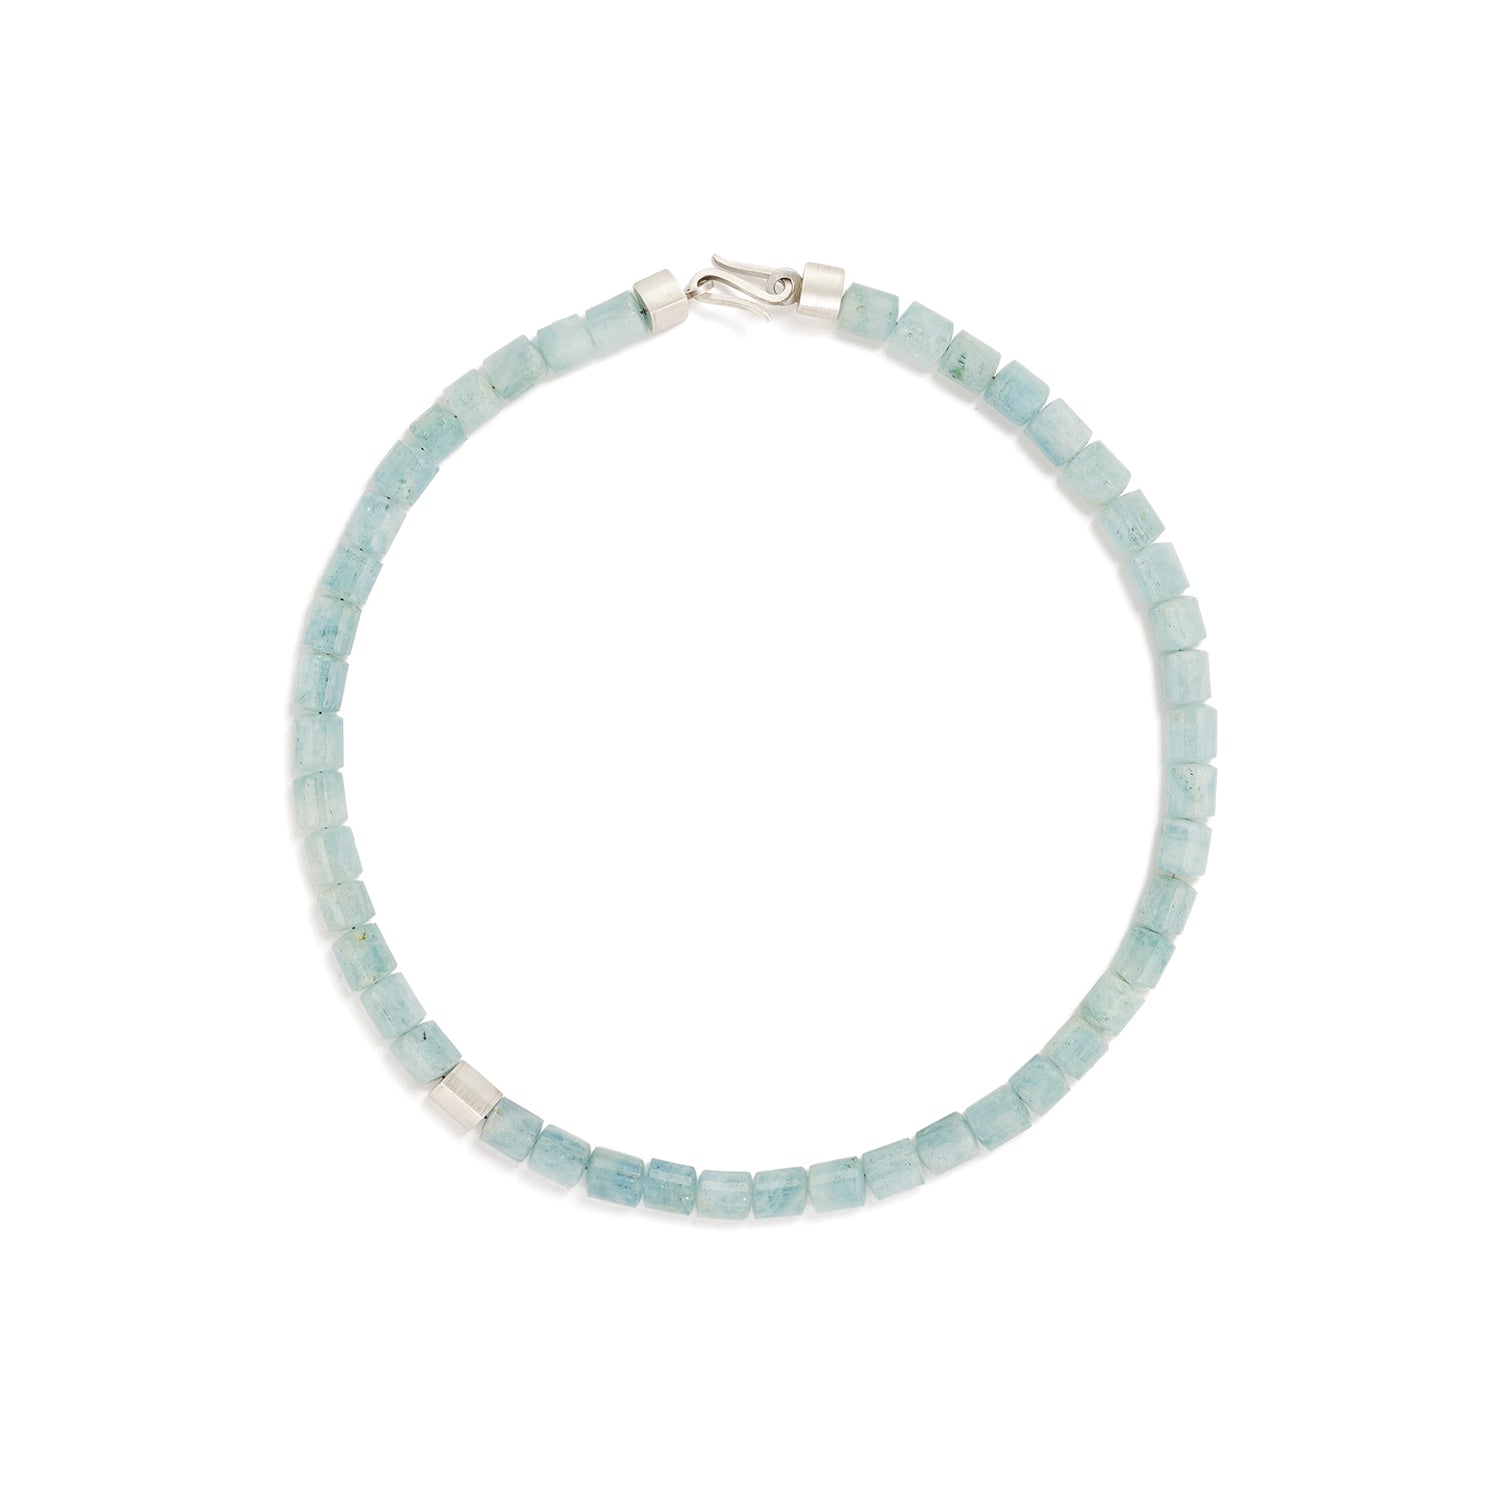 Aquamarine Necklace with Silver